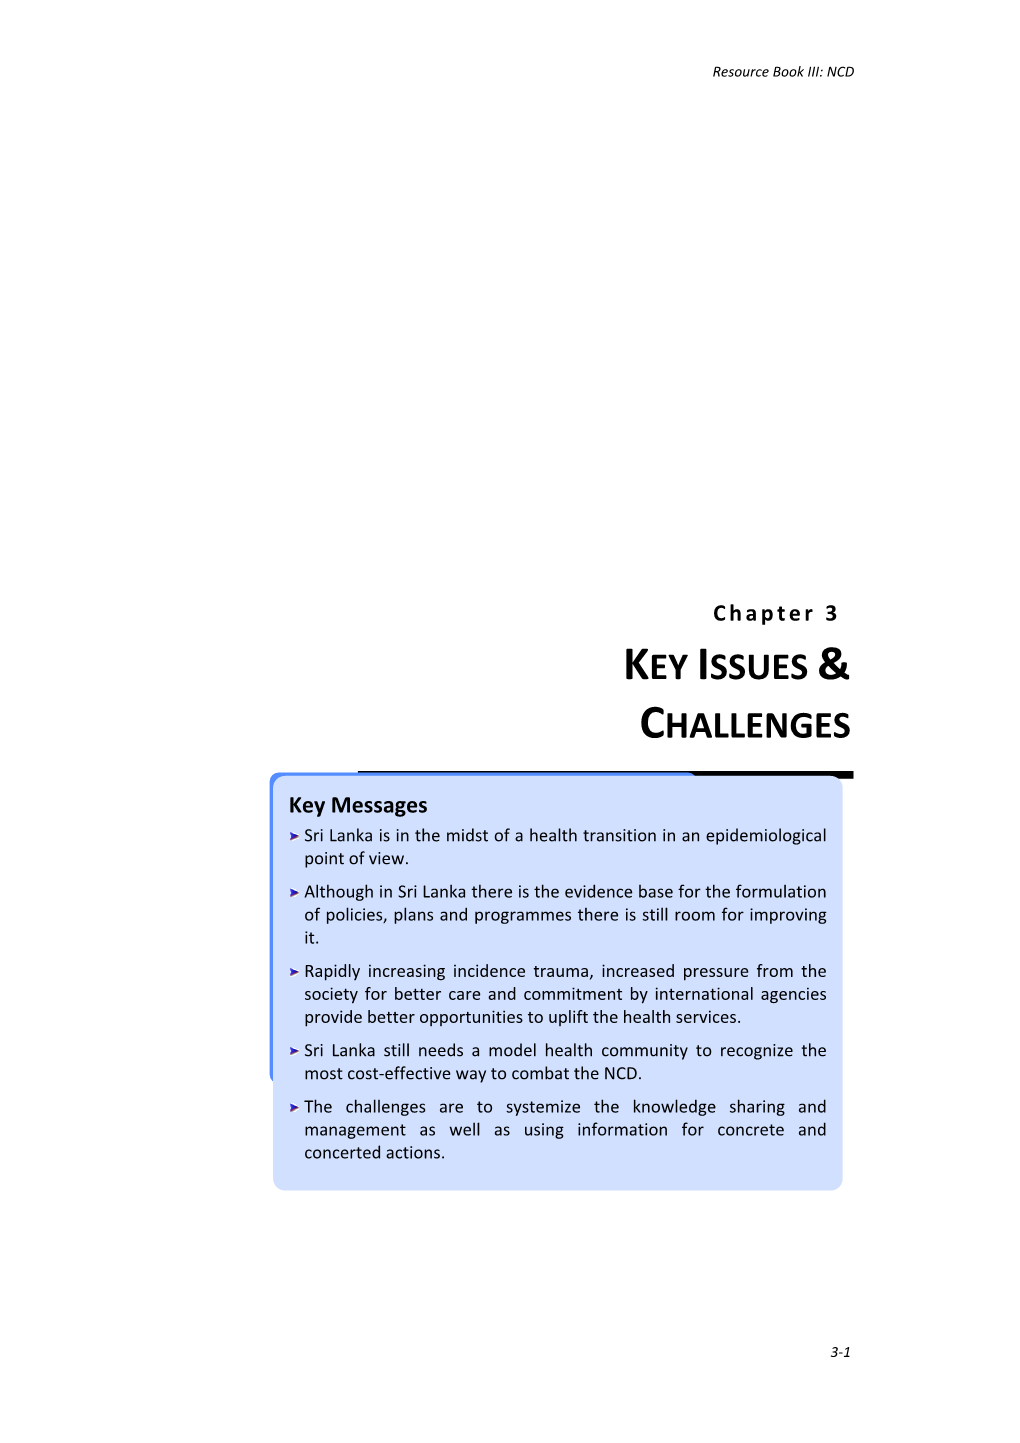 Key Issues & Challenges